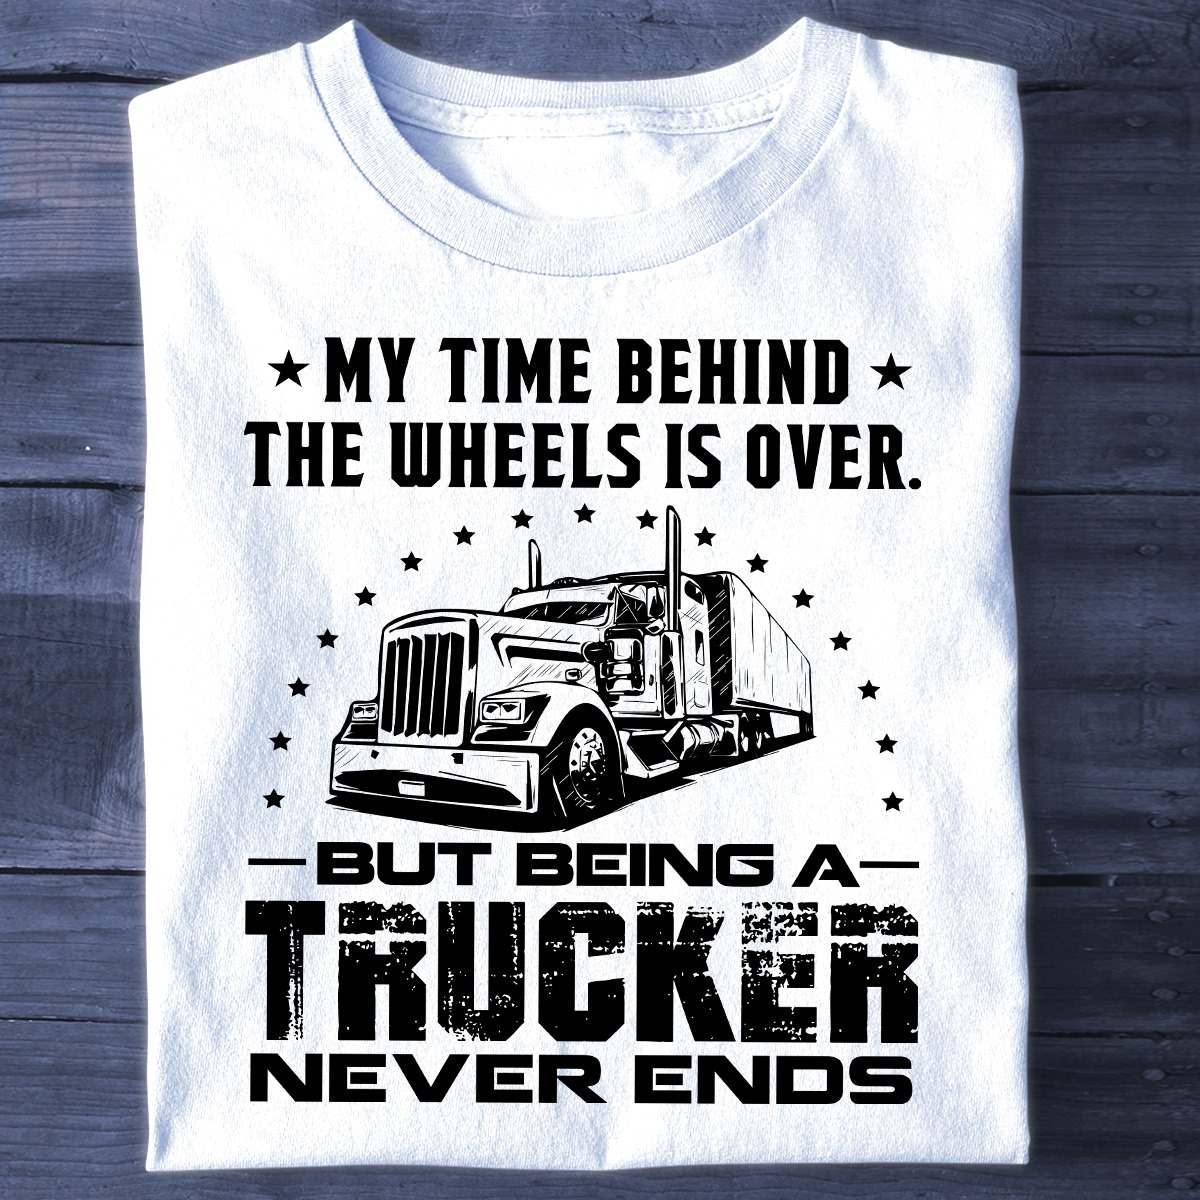 My time behind the wheels is over but being a trucker never ends - Trucker the job